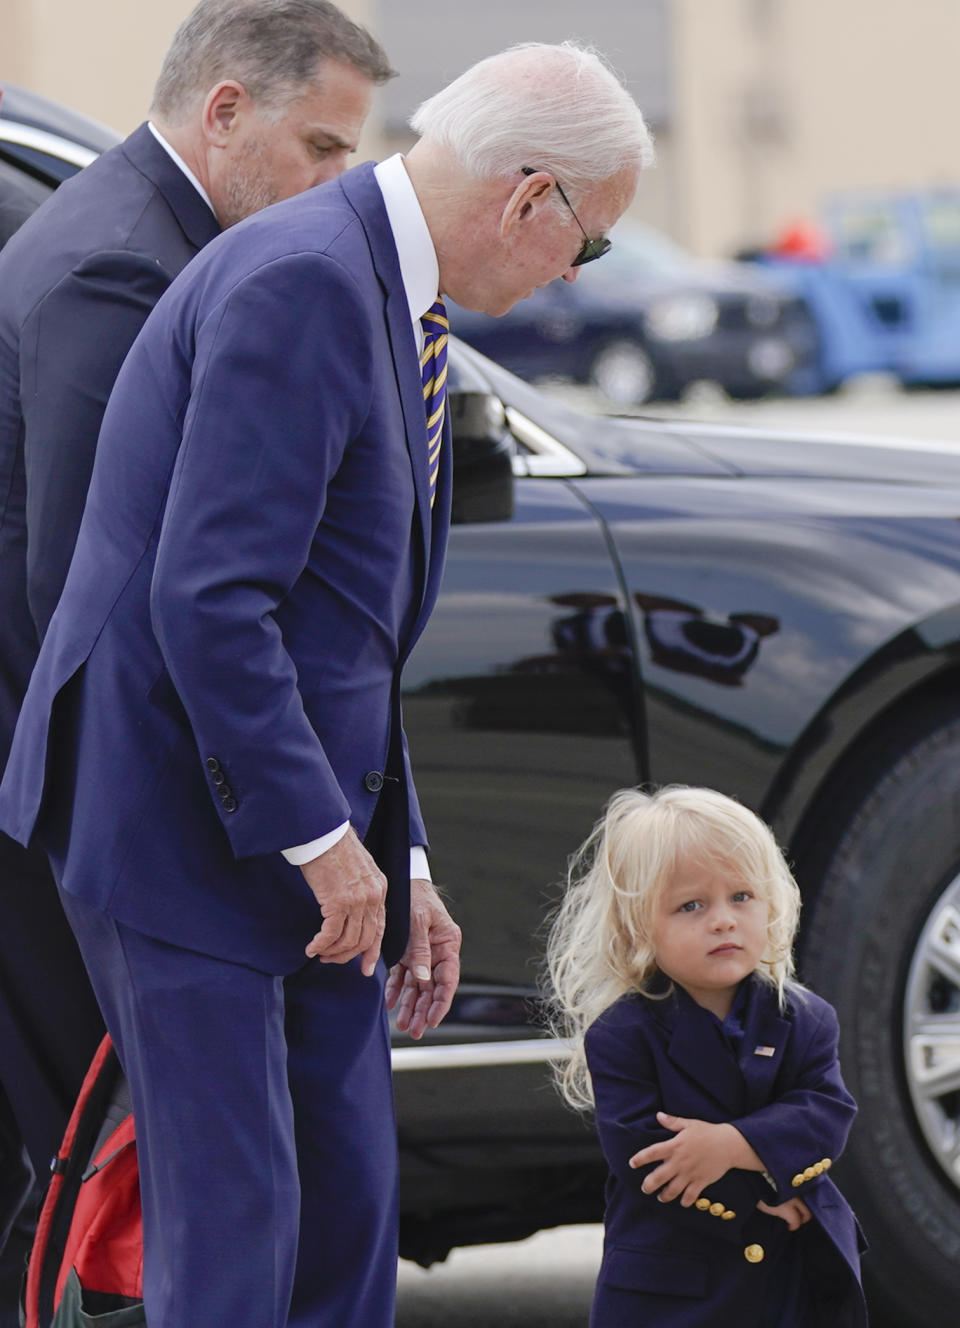 President Joe Biden looks at his grandson Beau Biden as he walks to board Air Force One with his son Hunter Biden at Andrews Air Force Base, Md., Wednesday, Aug. 10, 2022. The President is traveling to Kiawah Island, S.C., for vacation. (AP Photo/Manuel Balce Ceneta)